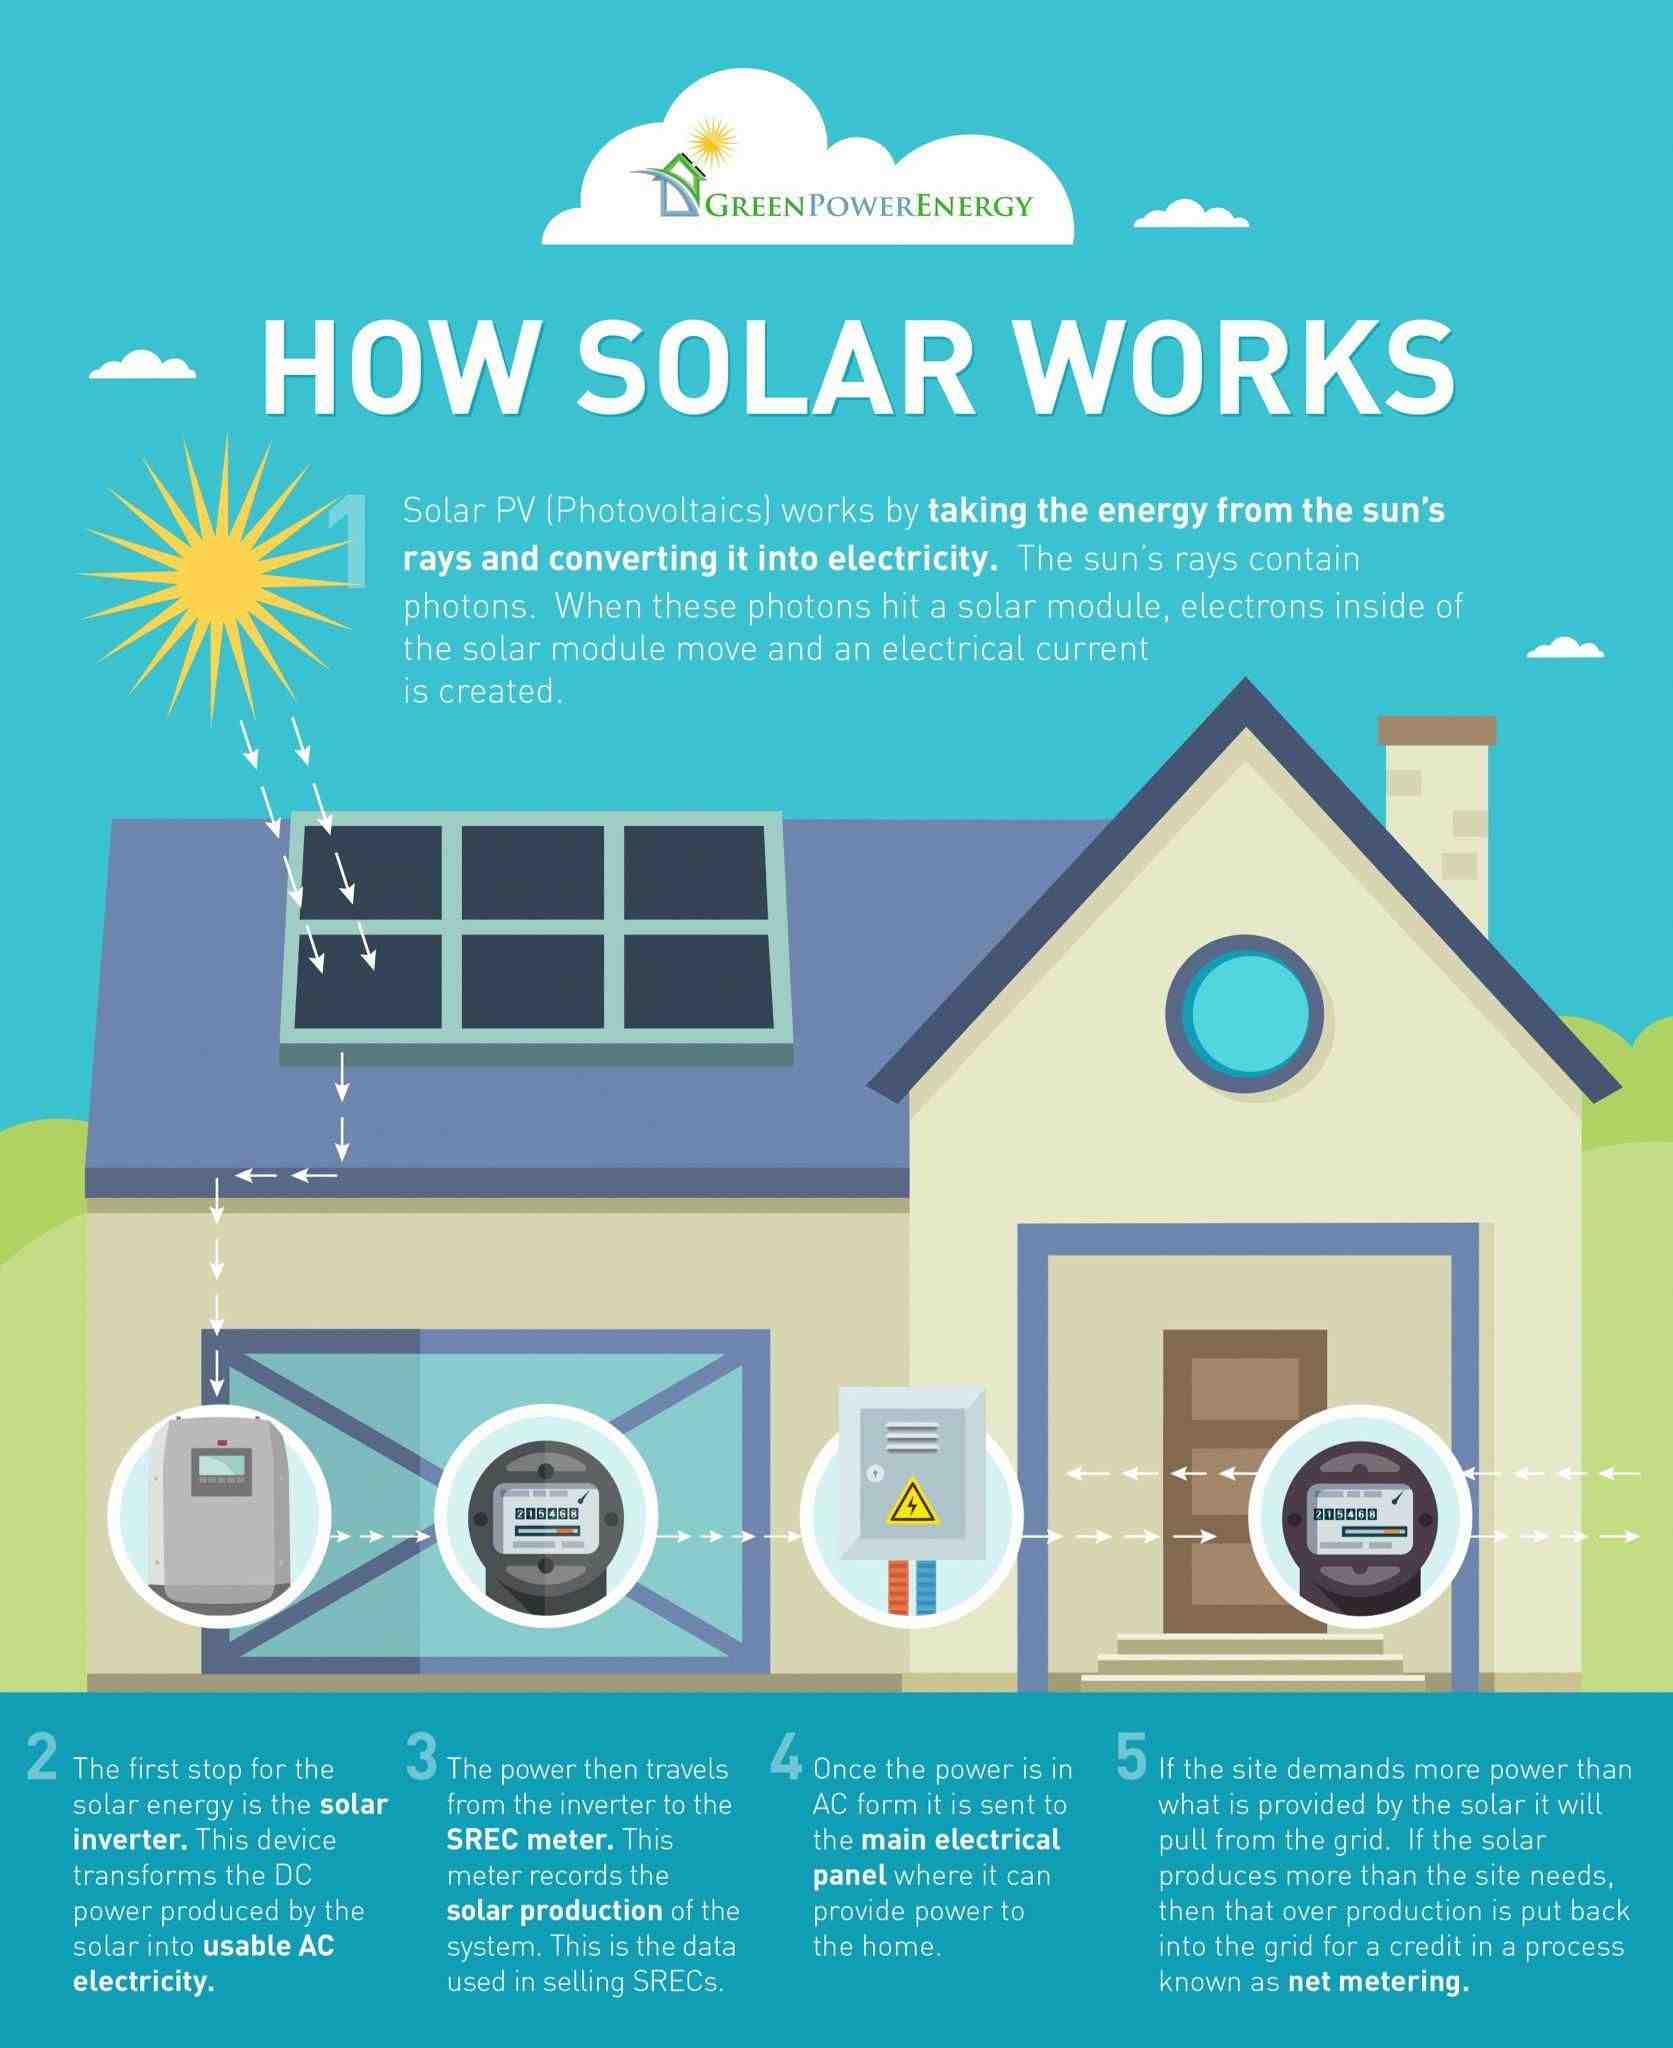 Who invented solar energy?